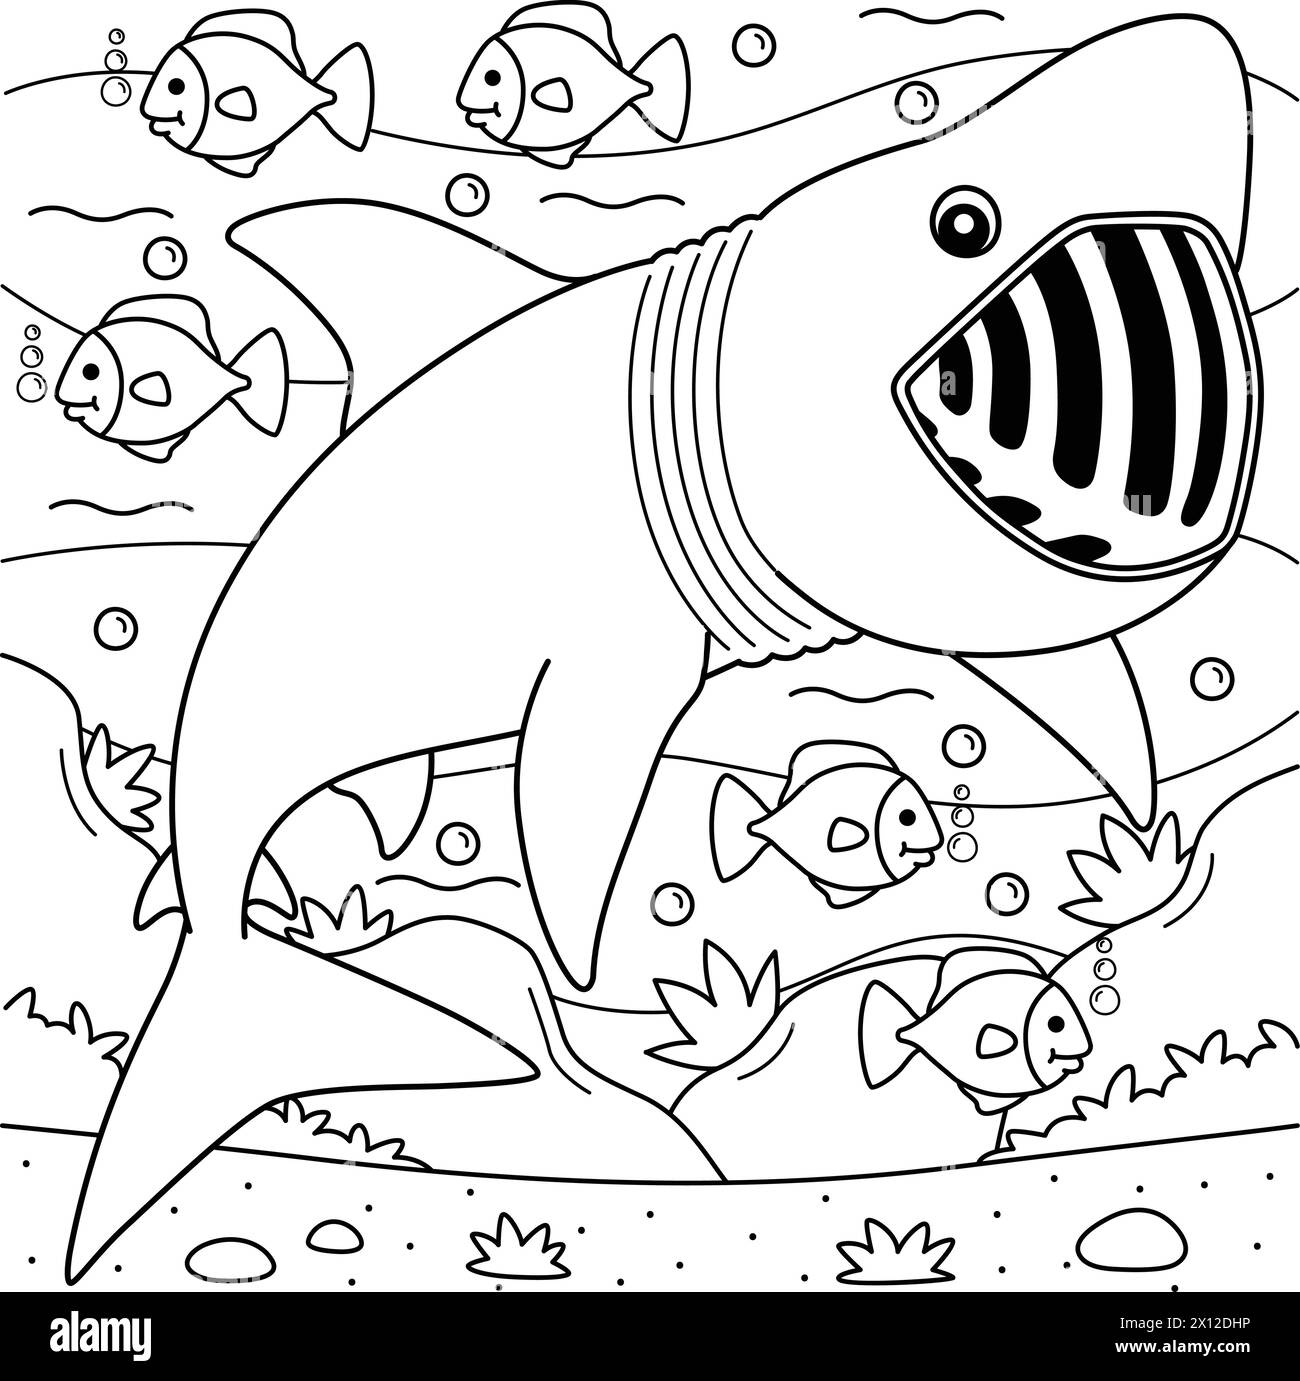 Basking Shark Coloring Page for Kids Stock Vector